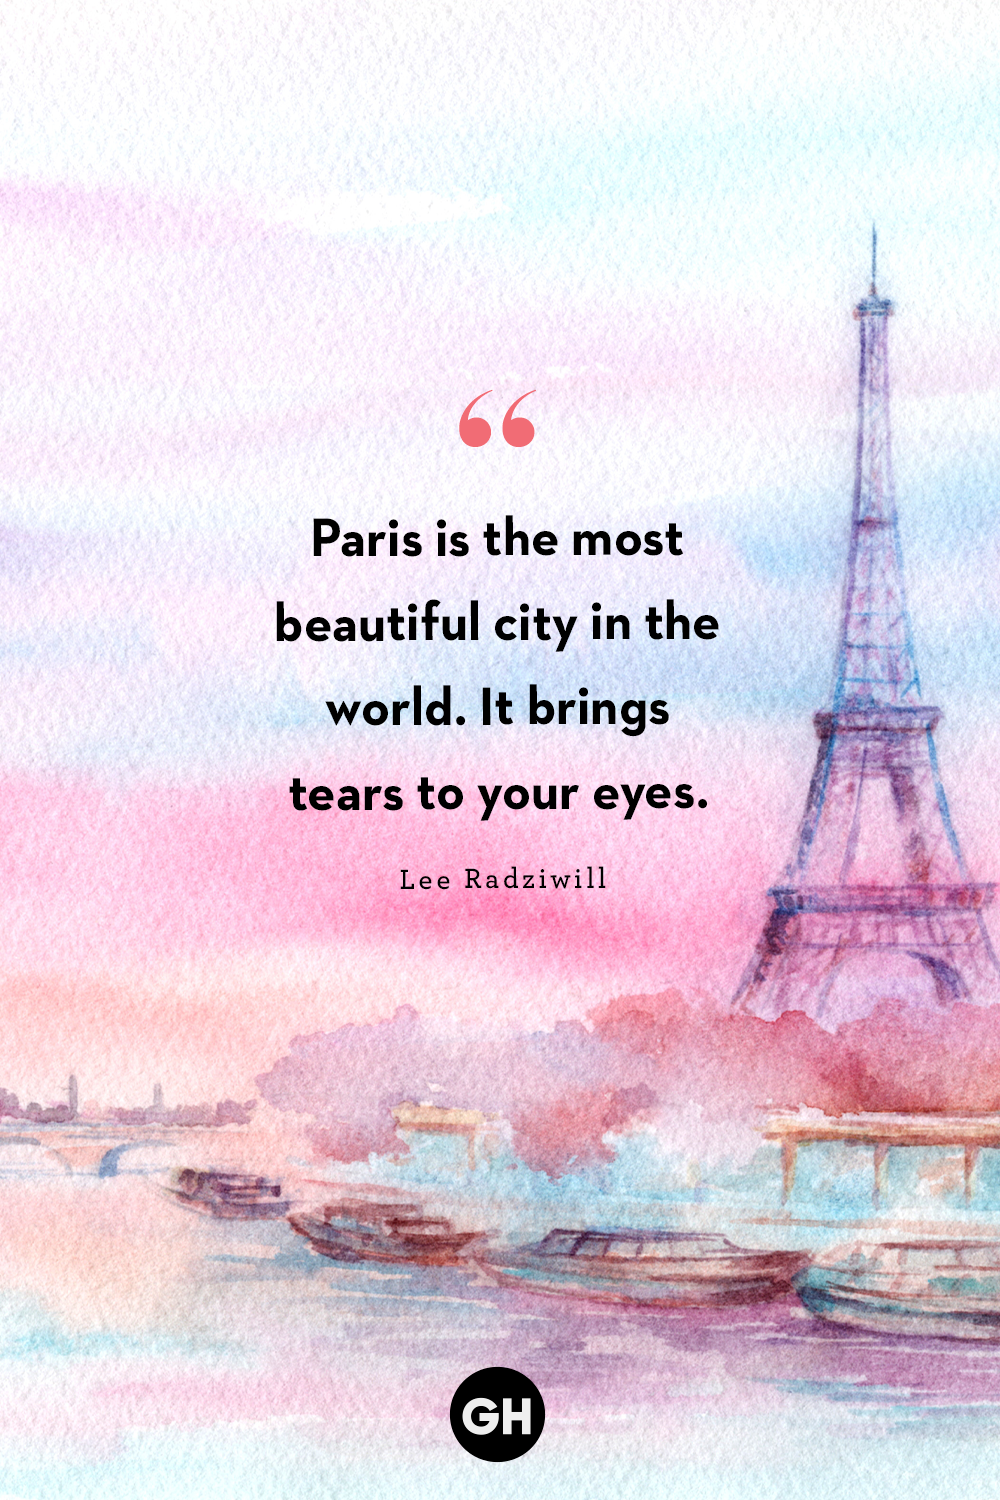 Paris, the most beautiful city in the world